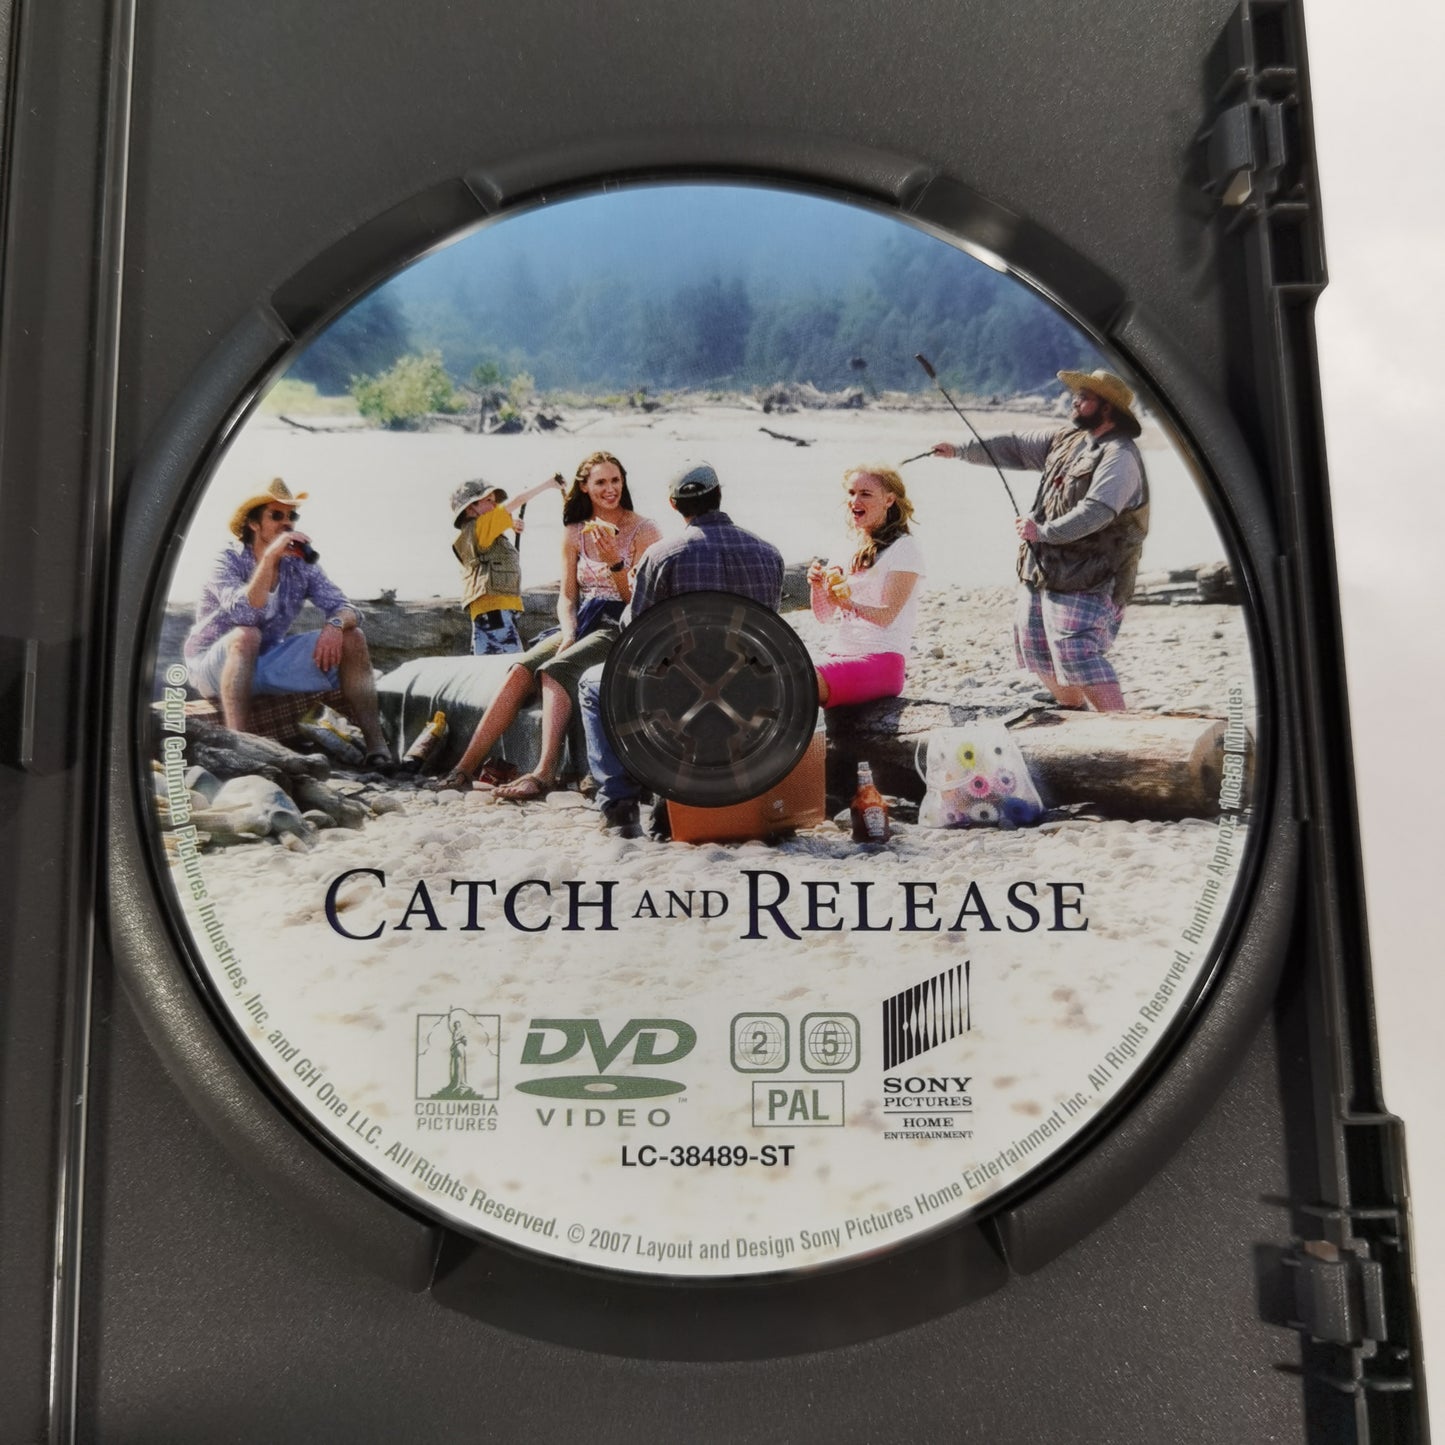 Catch and Release (2006) - DVD SE 2007